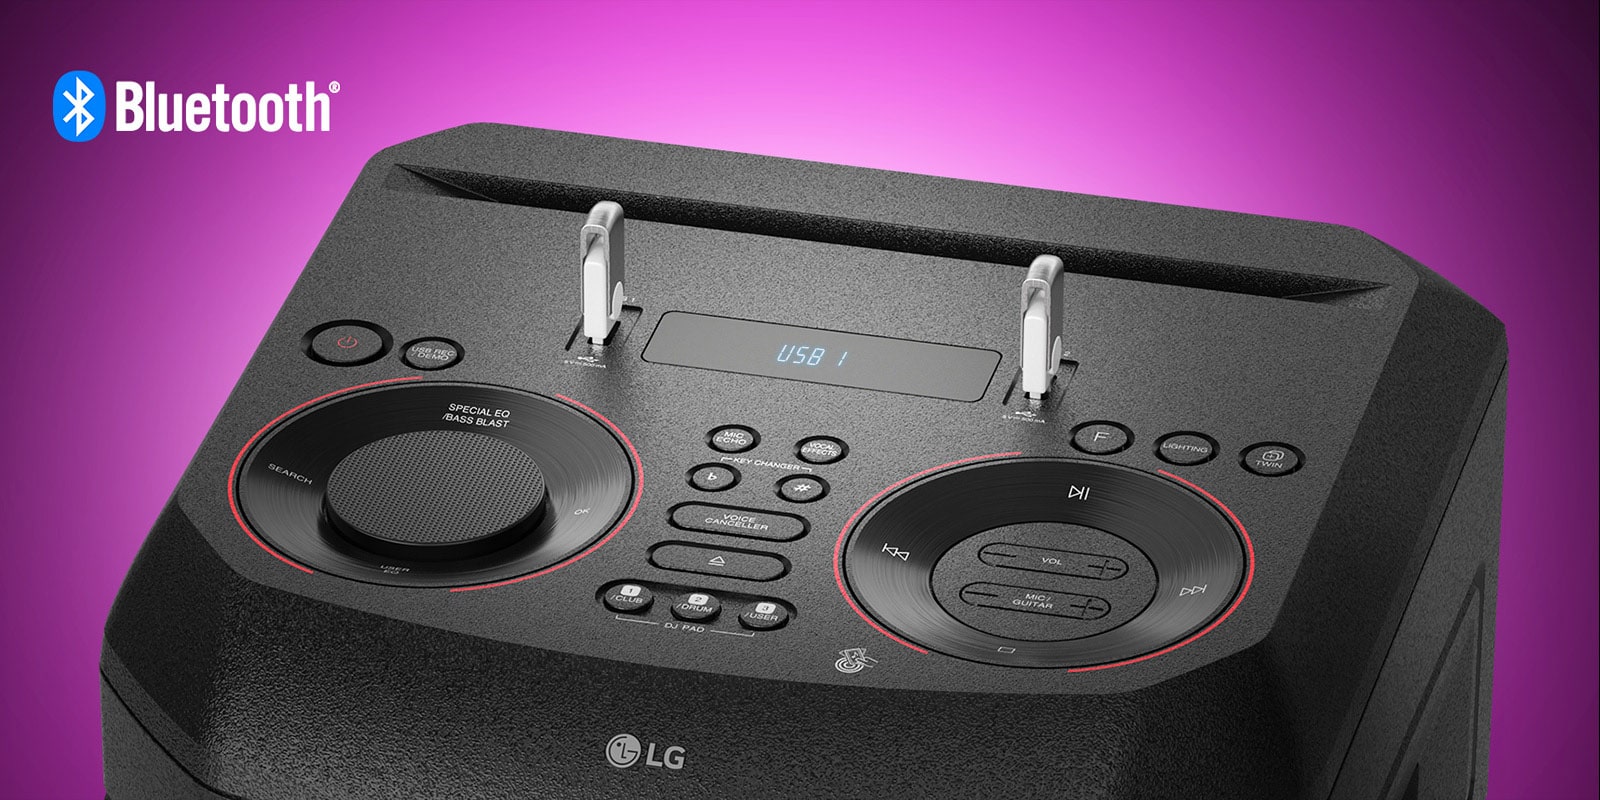 Zoom in on the control panel on top of the LG XBOOM with two USB media connected. The Bluetooth logo can be seen in the upper left corner.